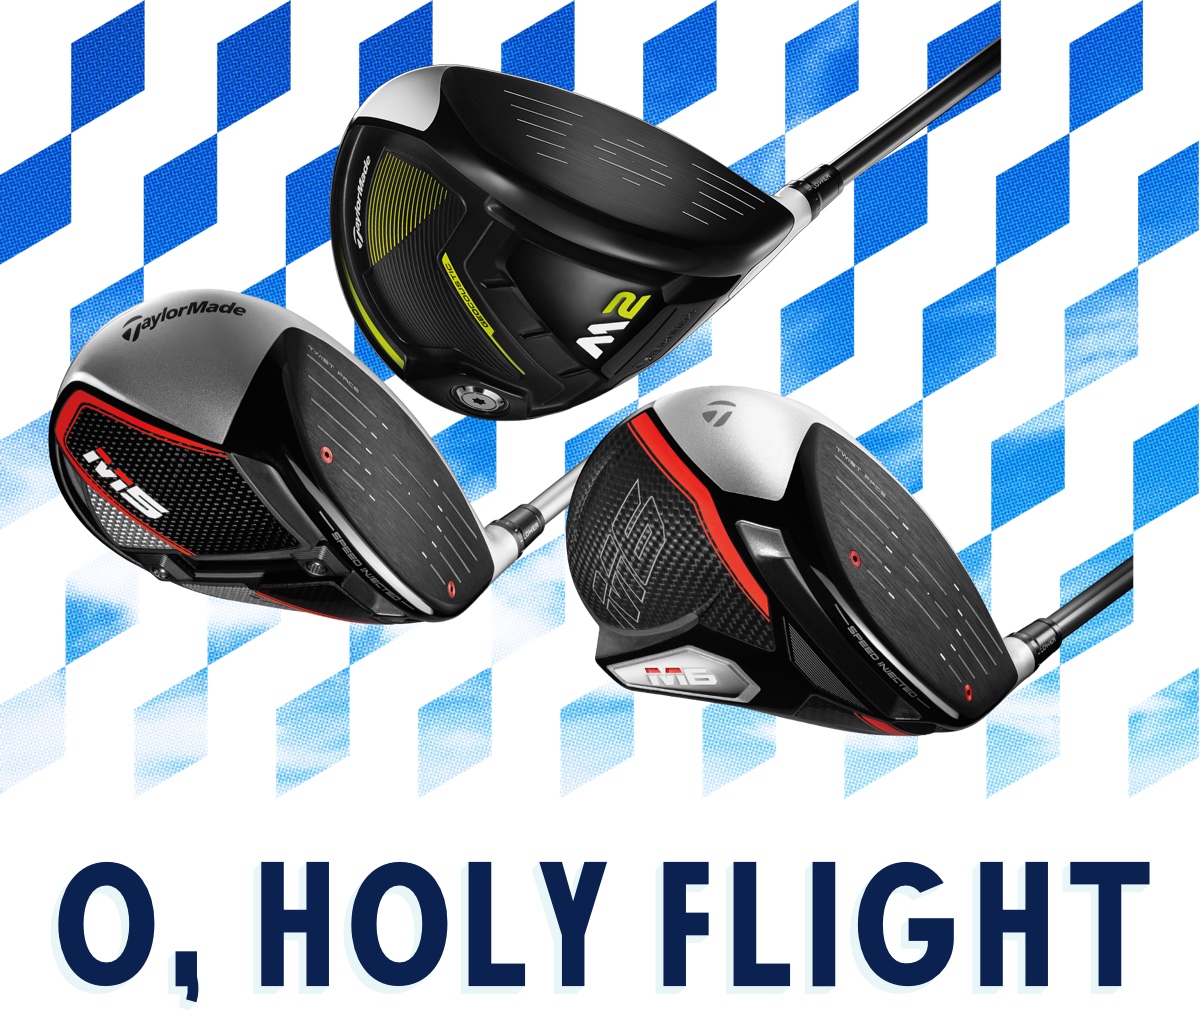 A driver for every swing, shop the M-Family today!